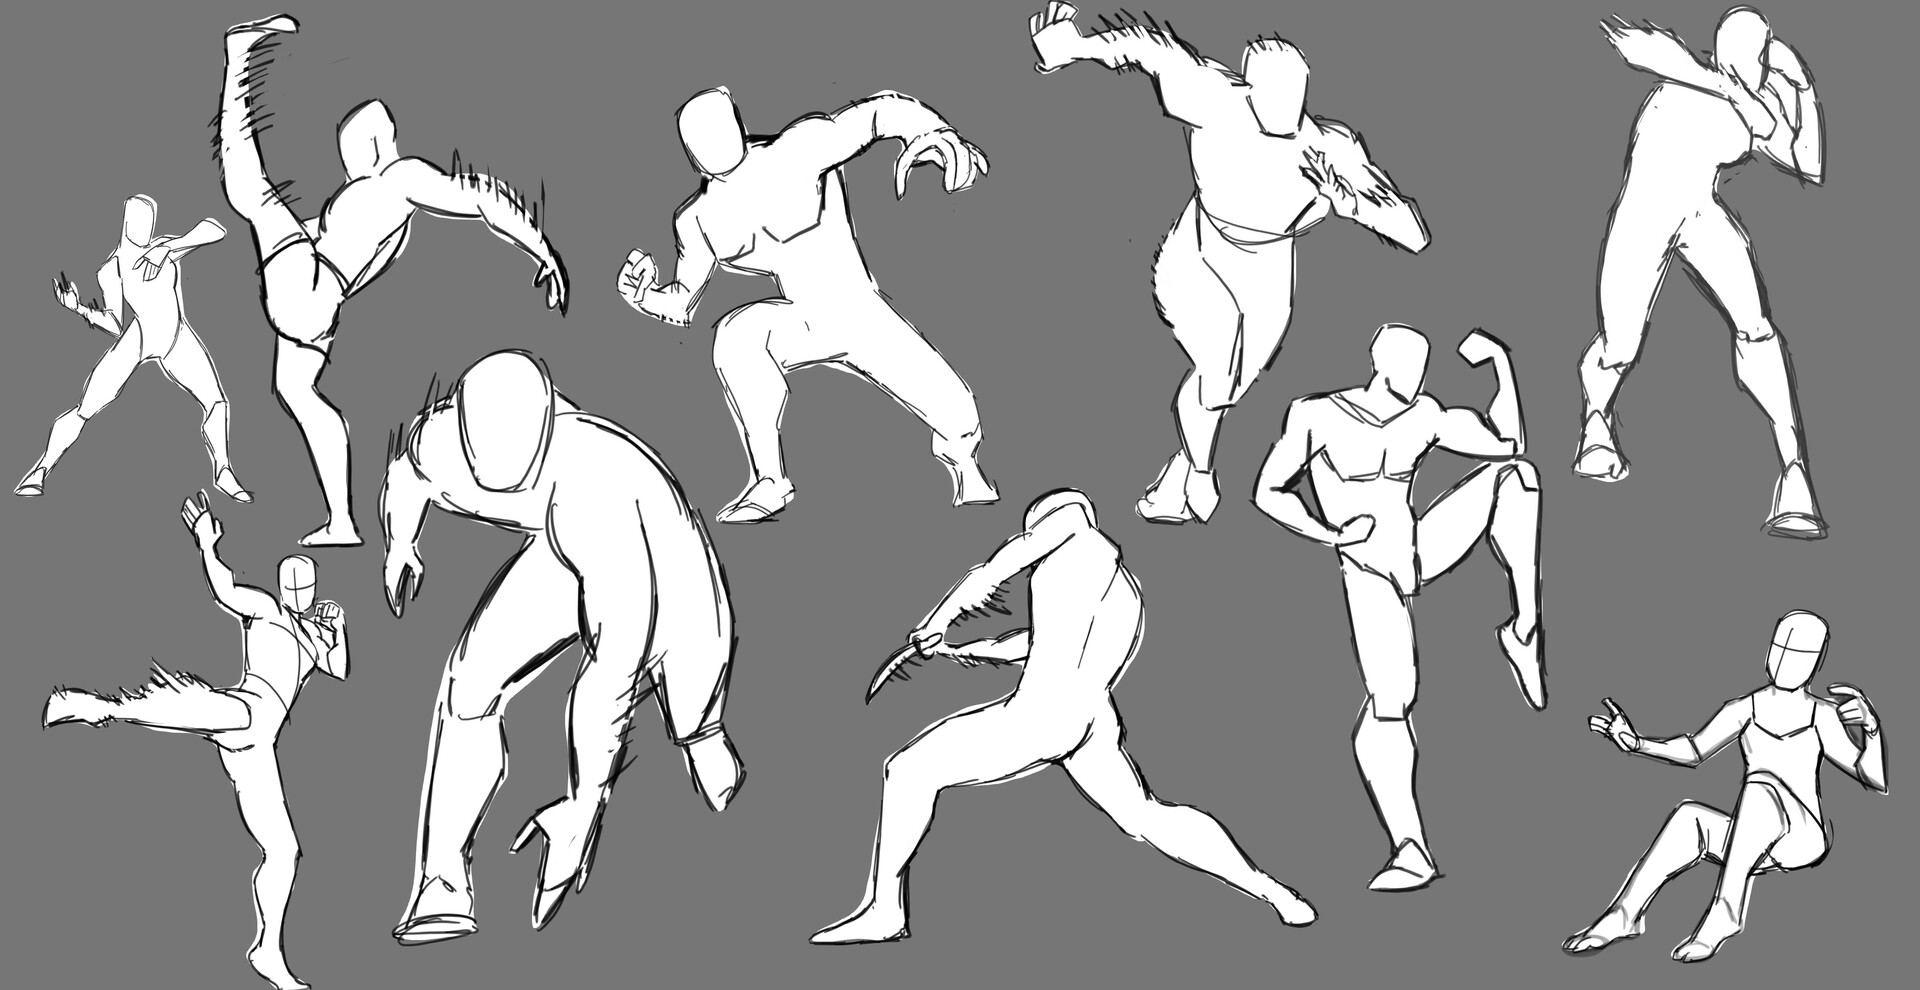 ArtStation - Action Poses 1